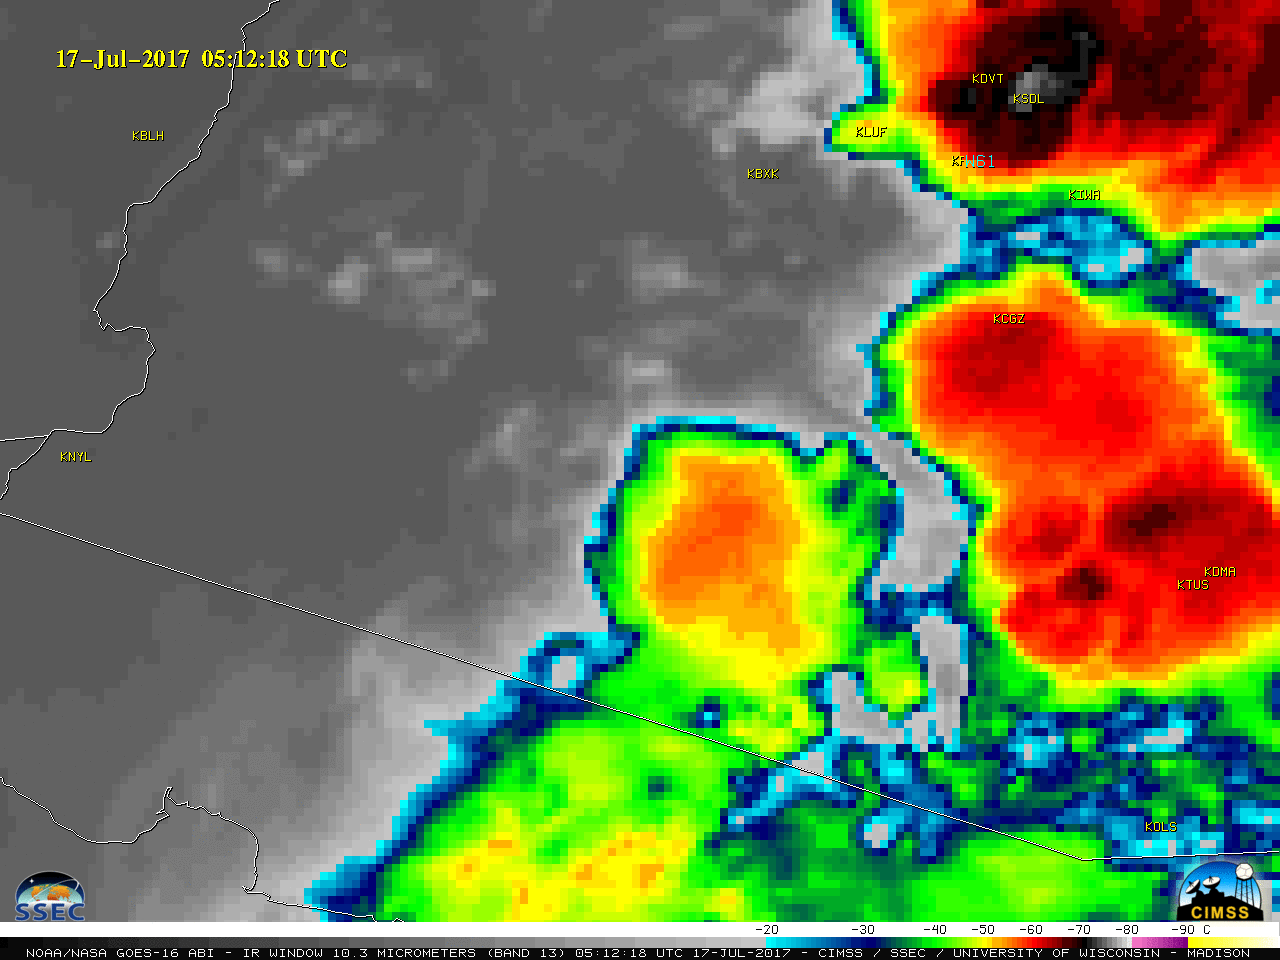 GOES-16 Infrared Window (10.3 µm) images, with station identifiers plotted in yellow and SPC storm reports plotted in cyan [click to play animation]